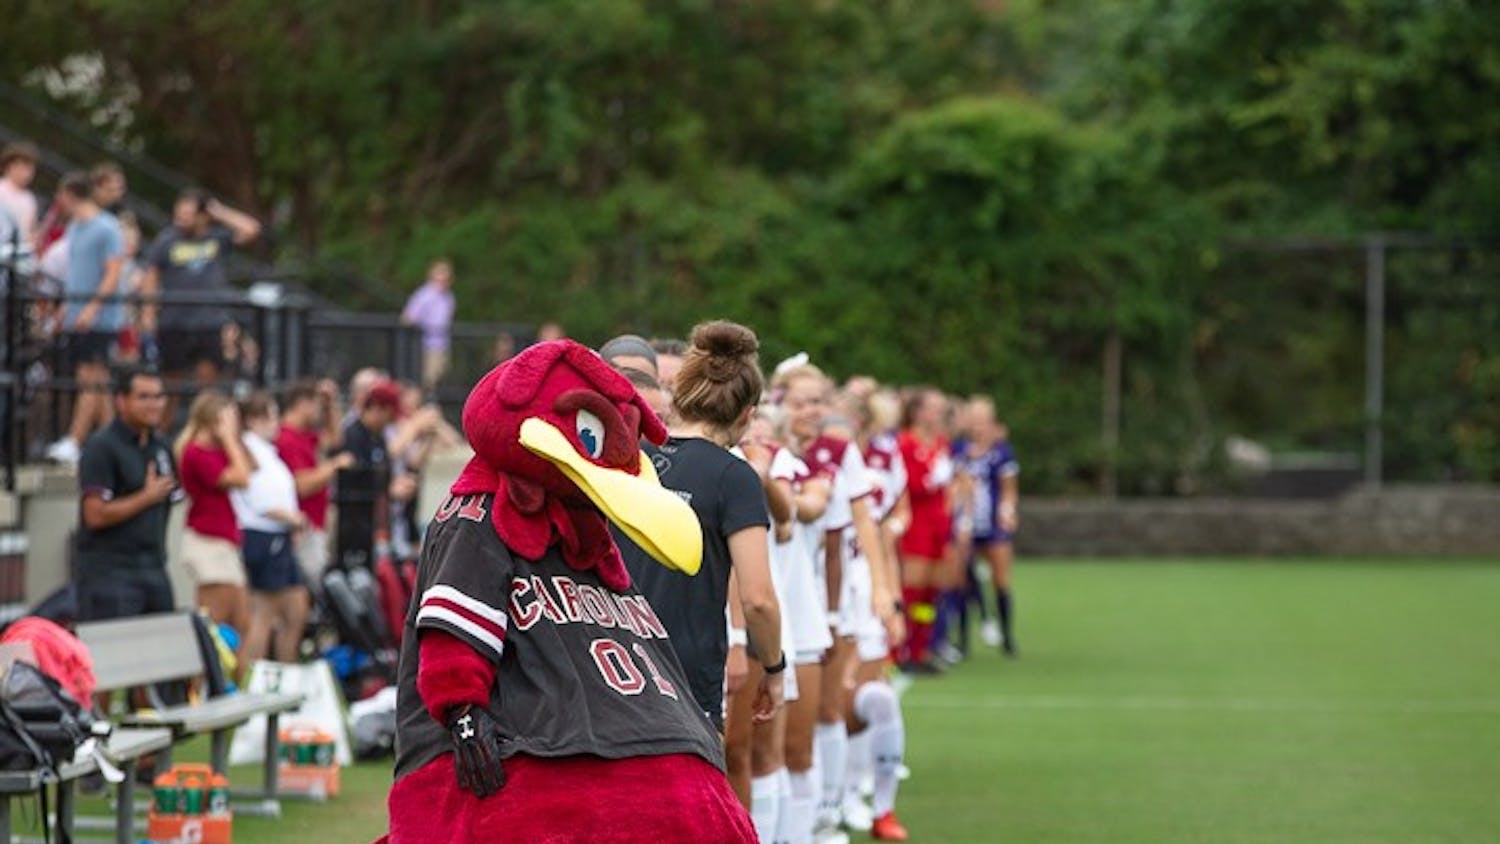 Cocky stands with the Gamecock women's soccer team before the University of South Carolina-Eastern Carolina University match on August 21, 2022. The Gamecocks beat the Pirates 2-0.